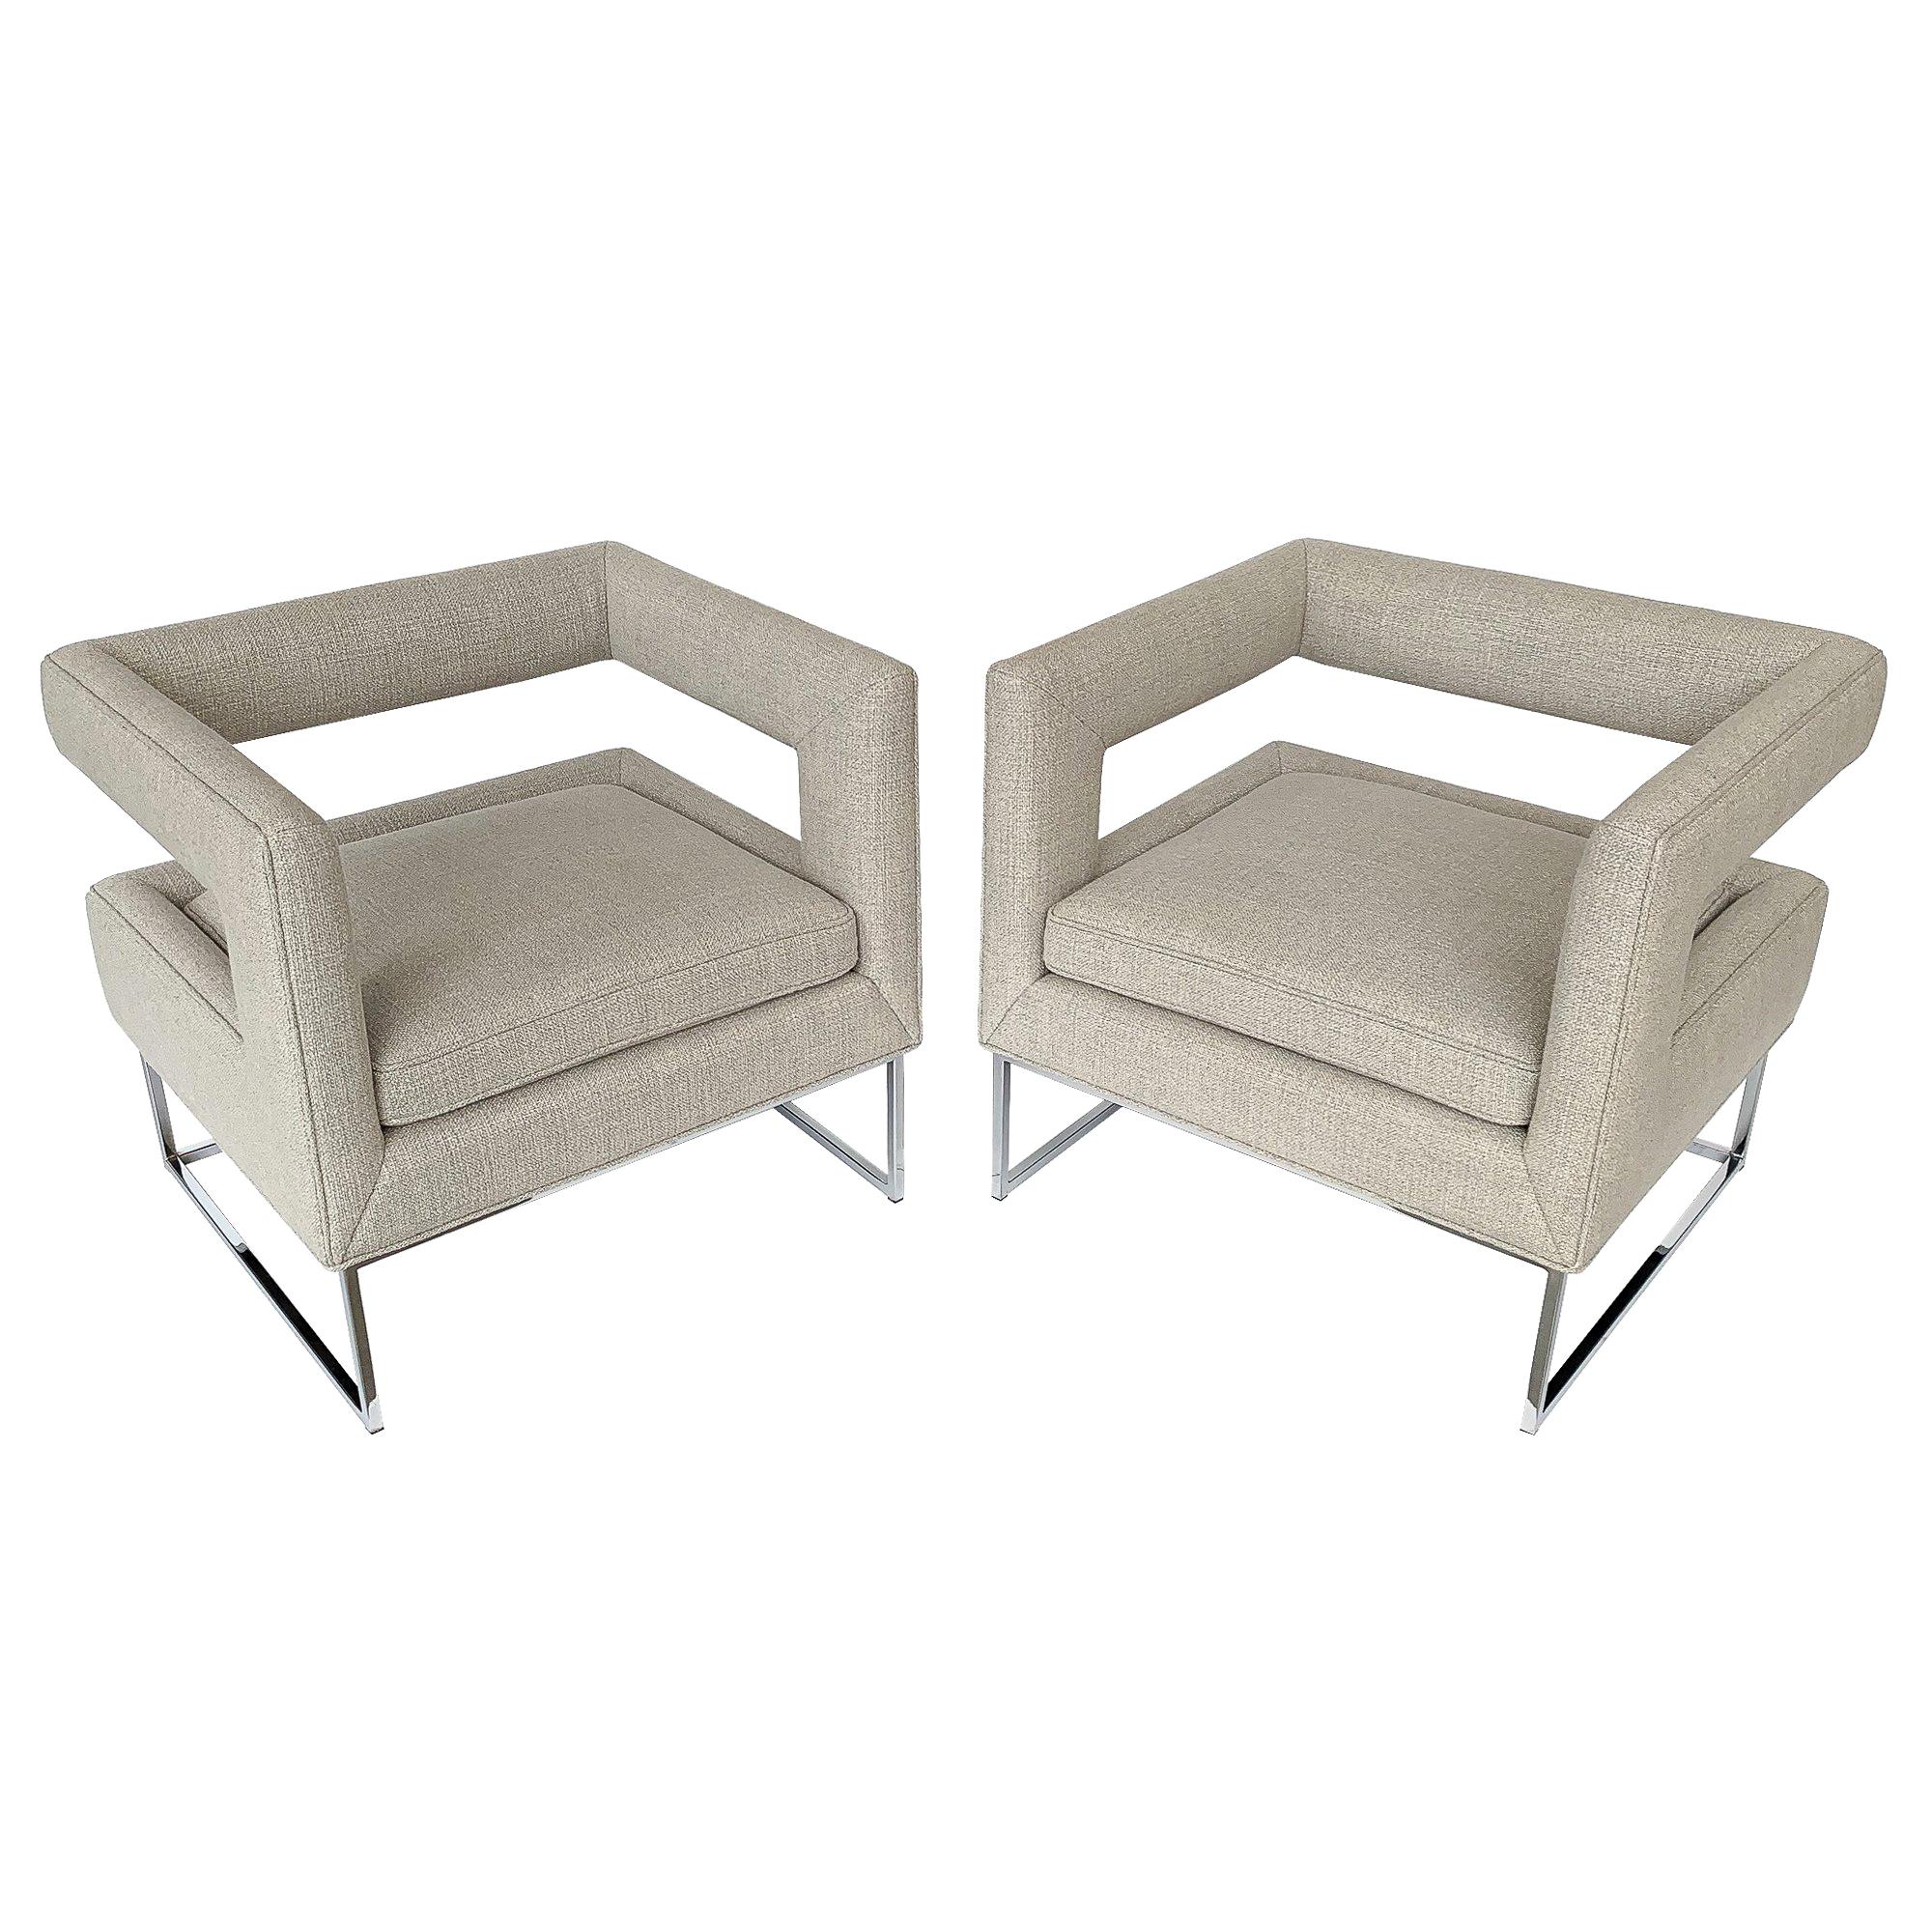 Pair of Milo Baughman Open Back Lounge Chairs